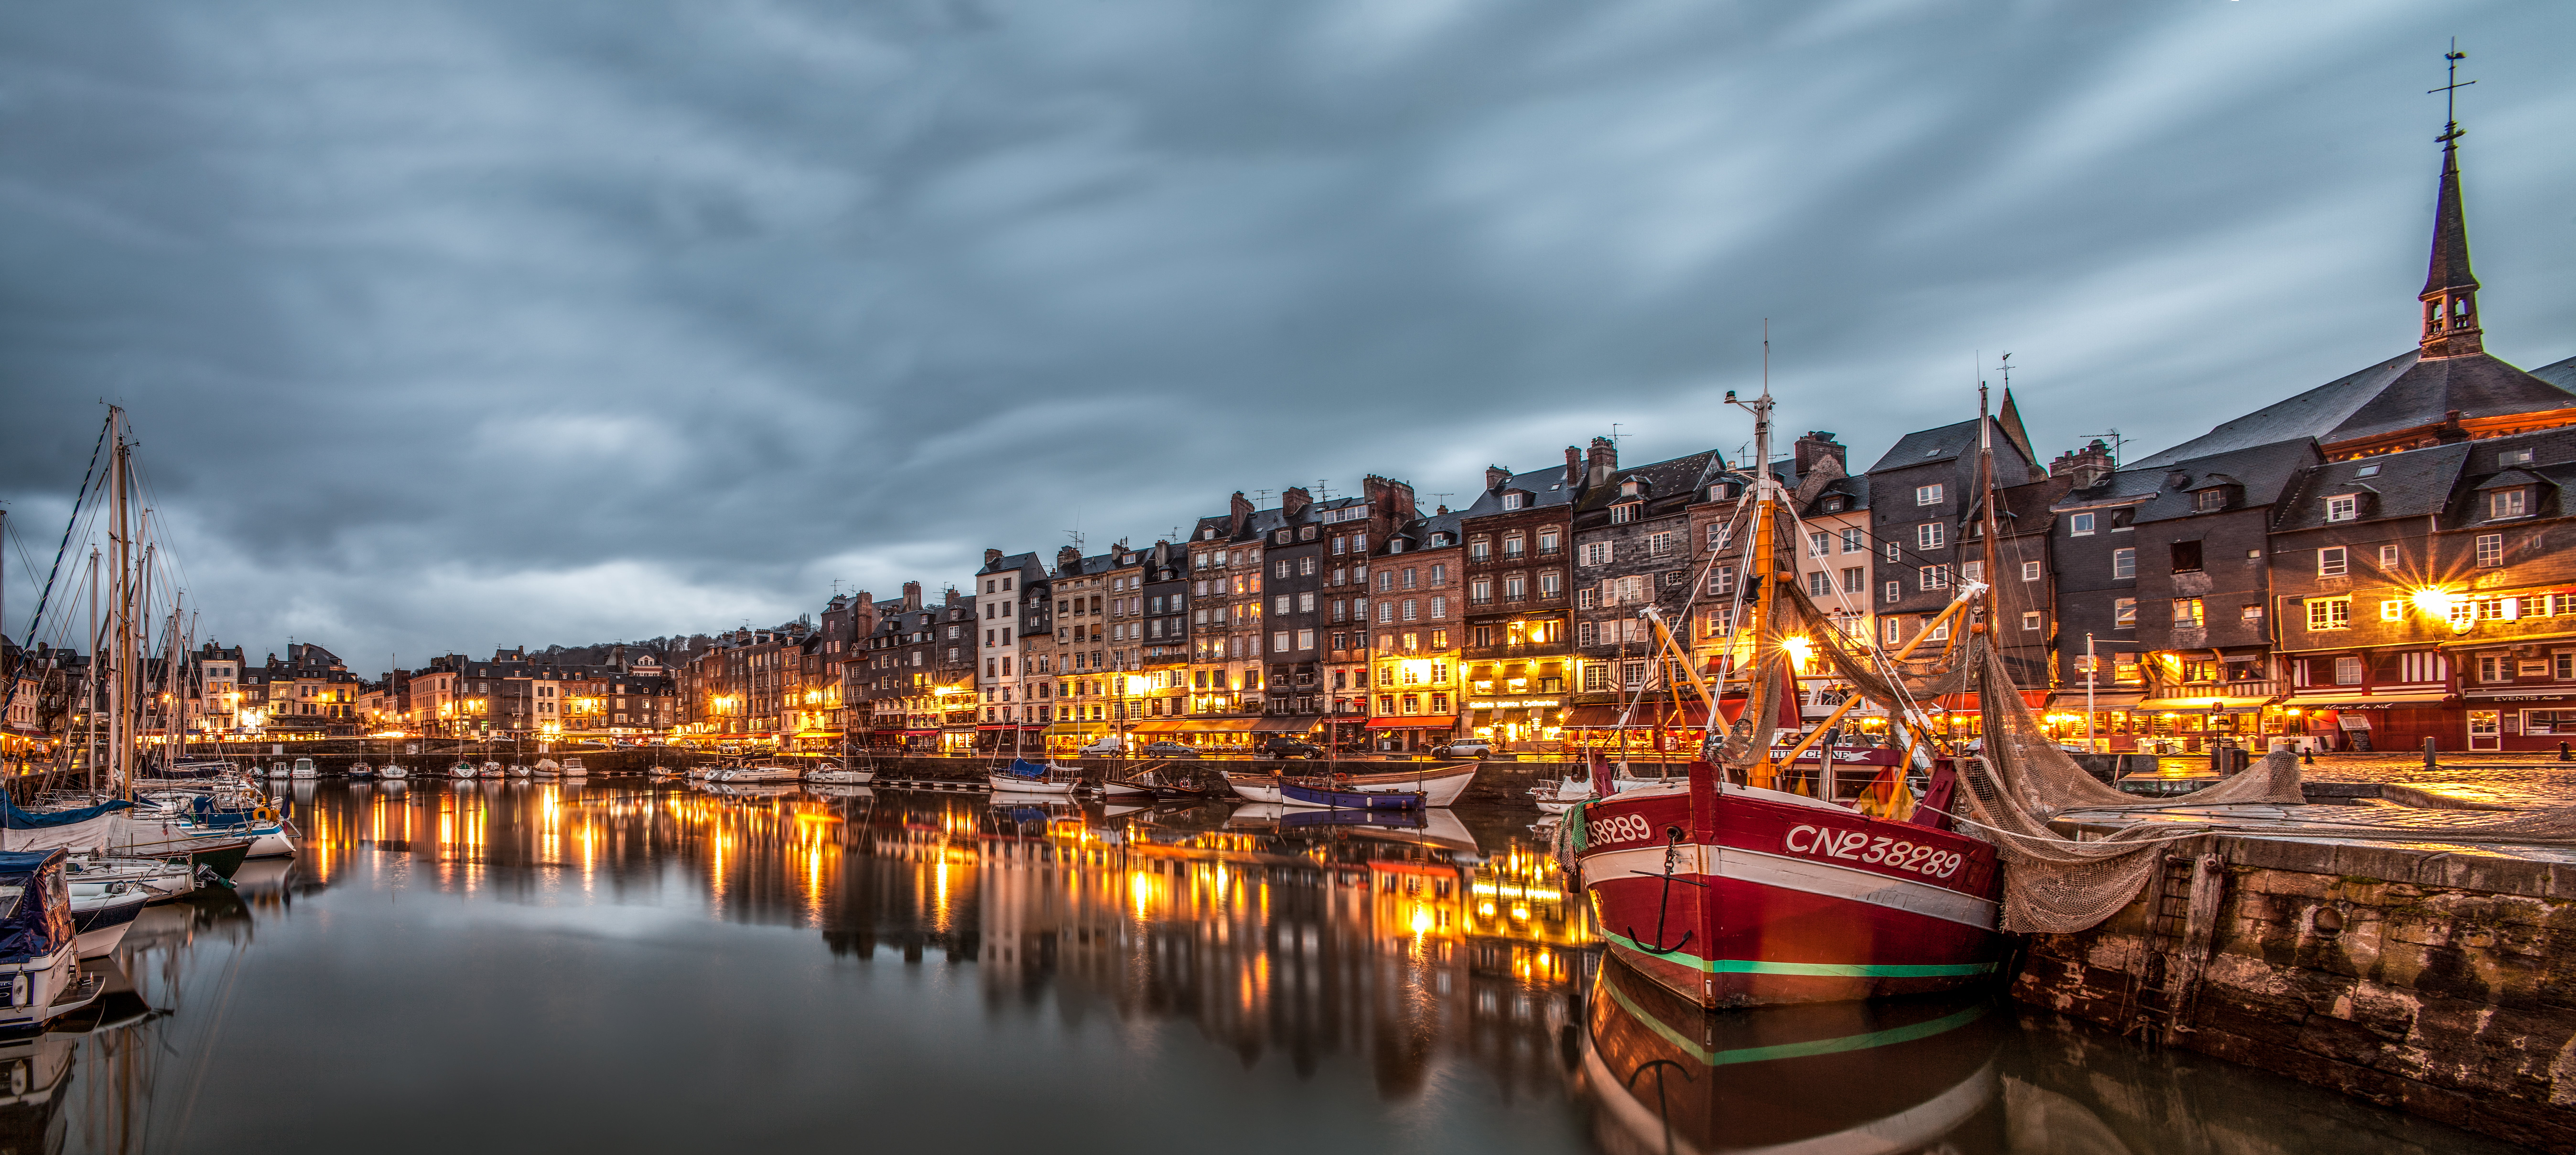 landscape photography of Grand Canal, Venice, Italy, honfleur